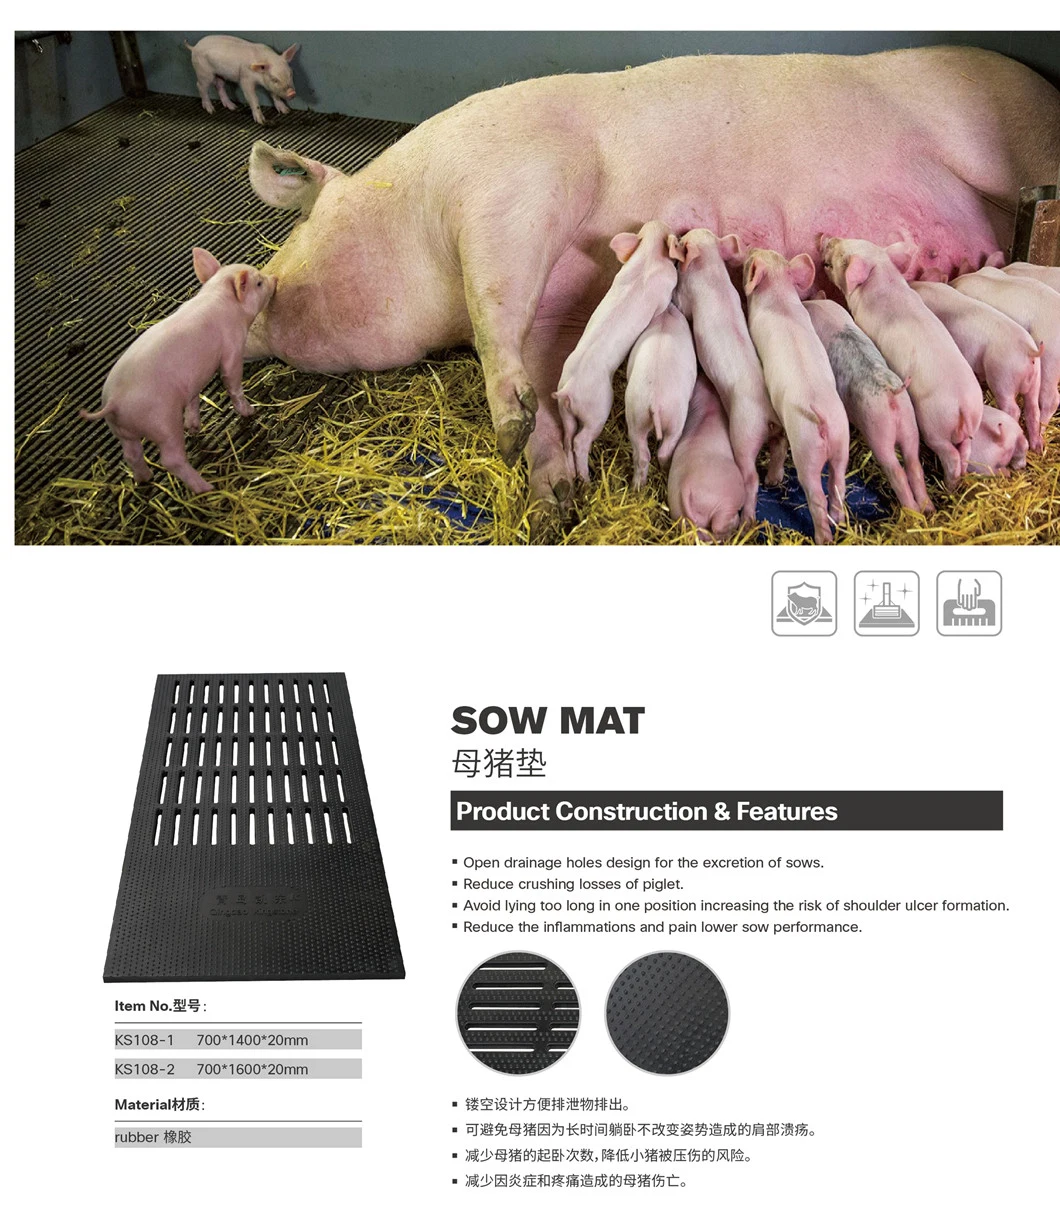 Factory High Quality Sow / Pig / Hog Hot DIP Galvanized Gestation Stall Rubber Floor